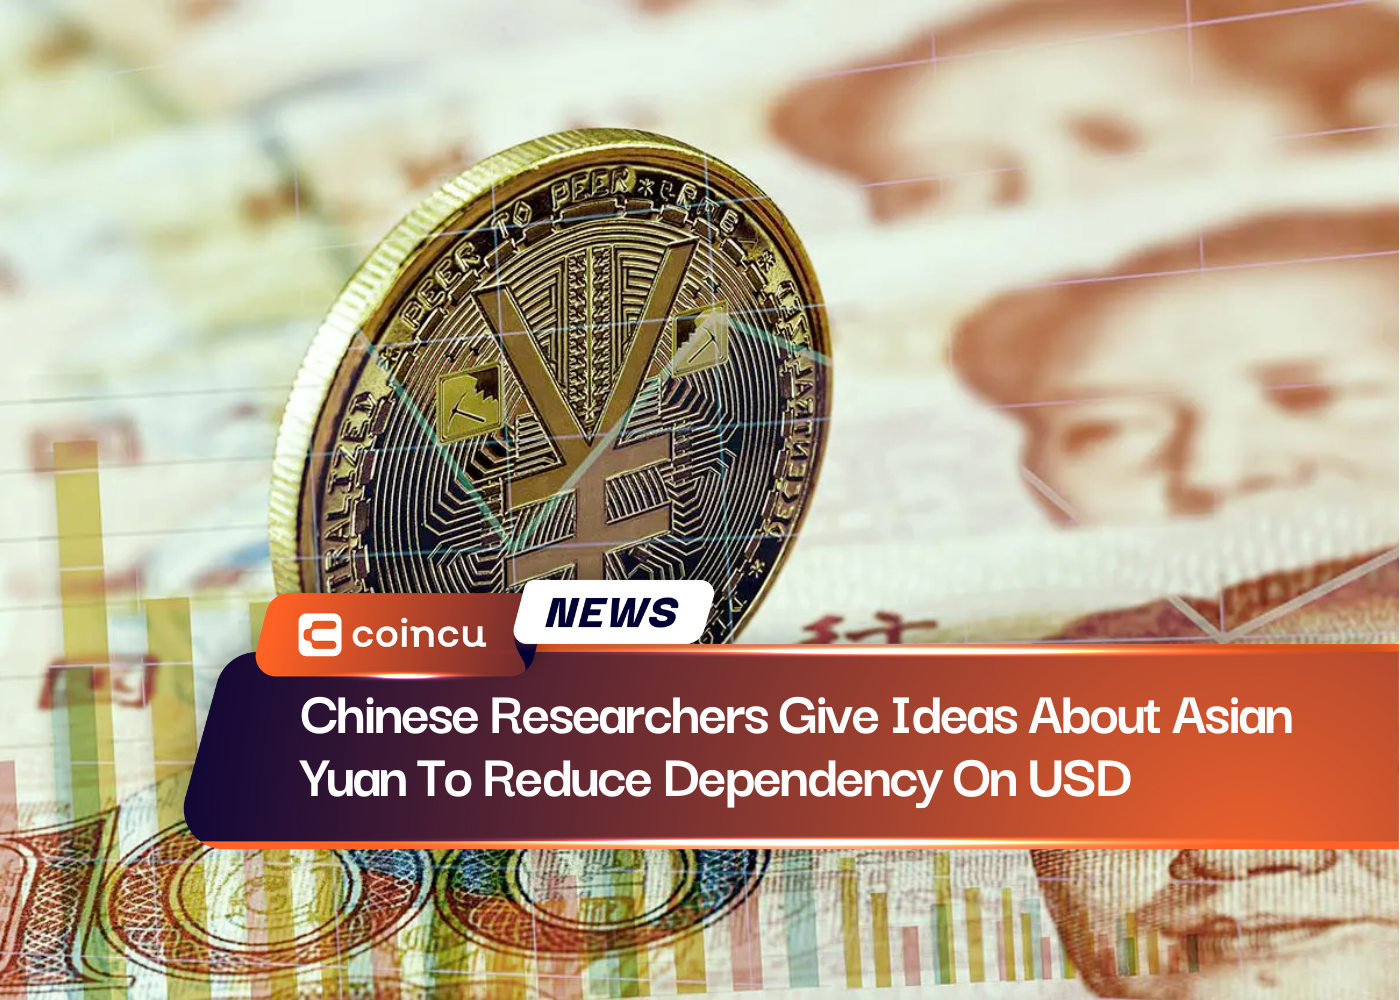 Chinese Researchers Give Ideas About Asian Yuan To Reduce Dependency On USD